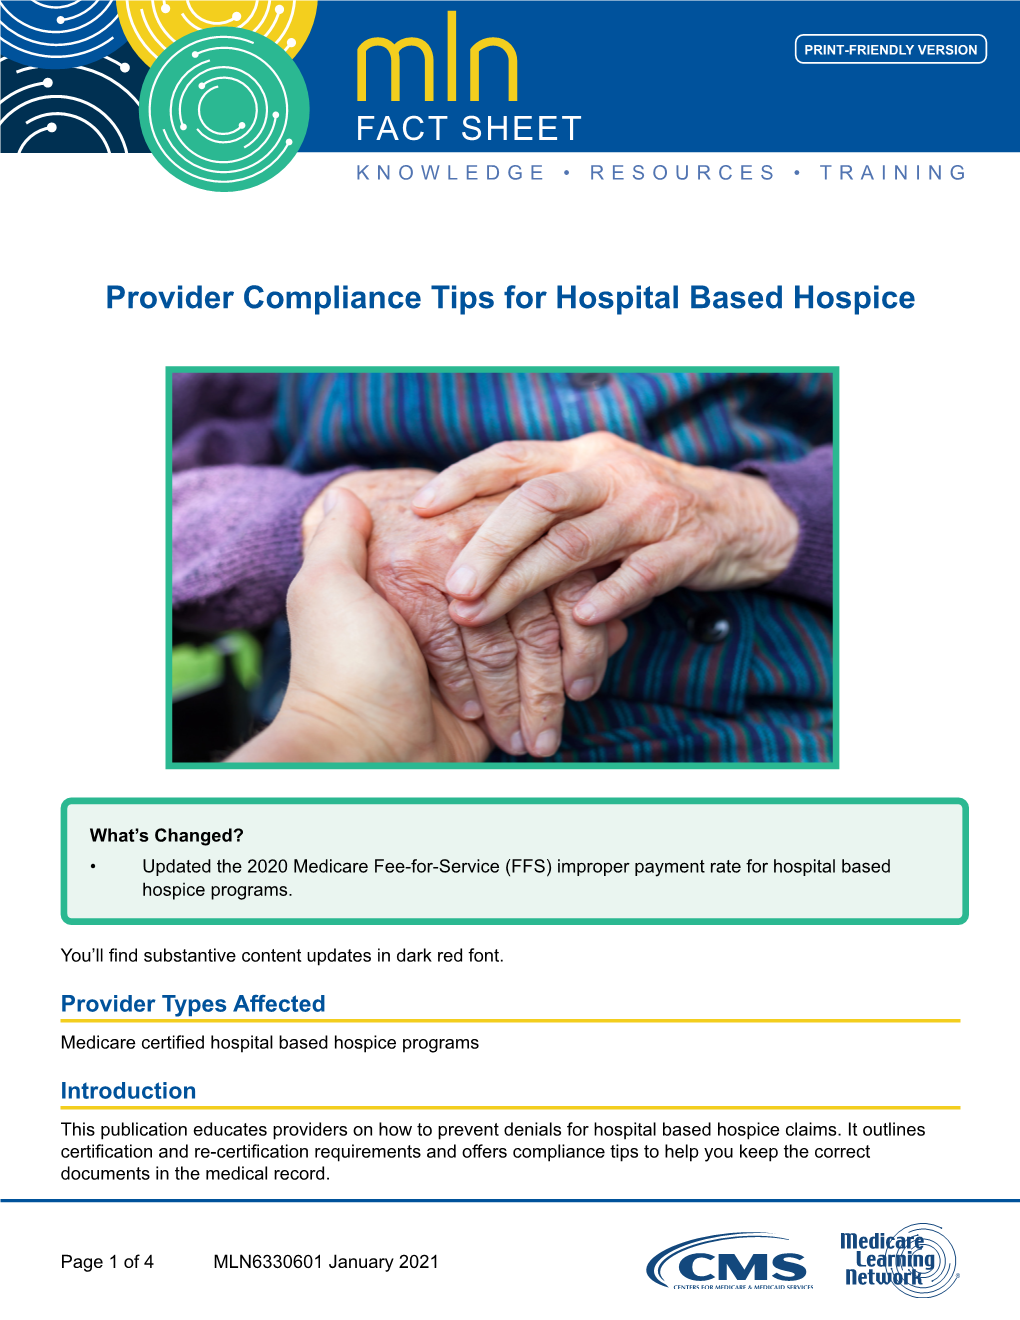 Provider Compliance Tips for Hospital Based Hospice